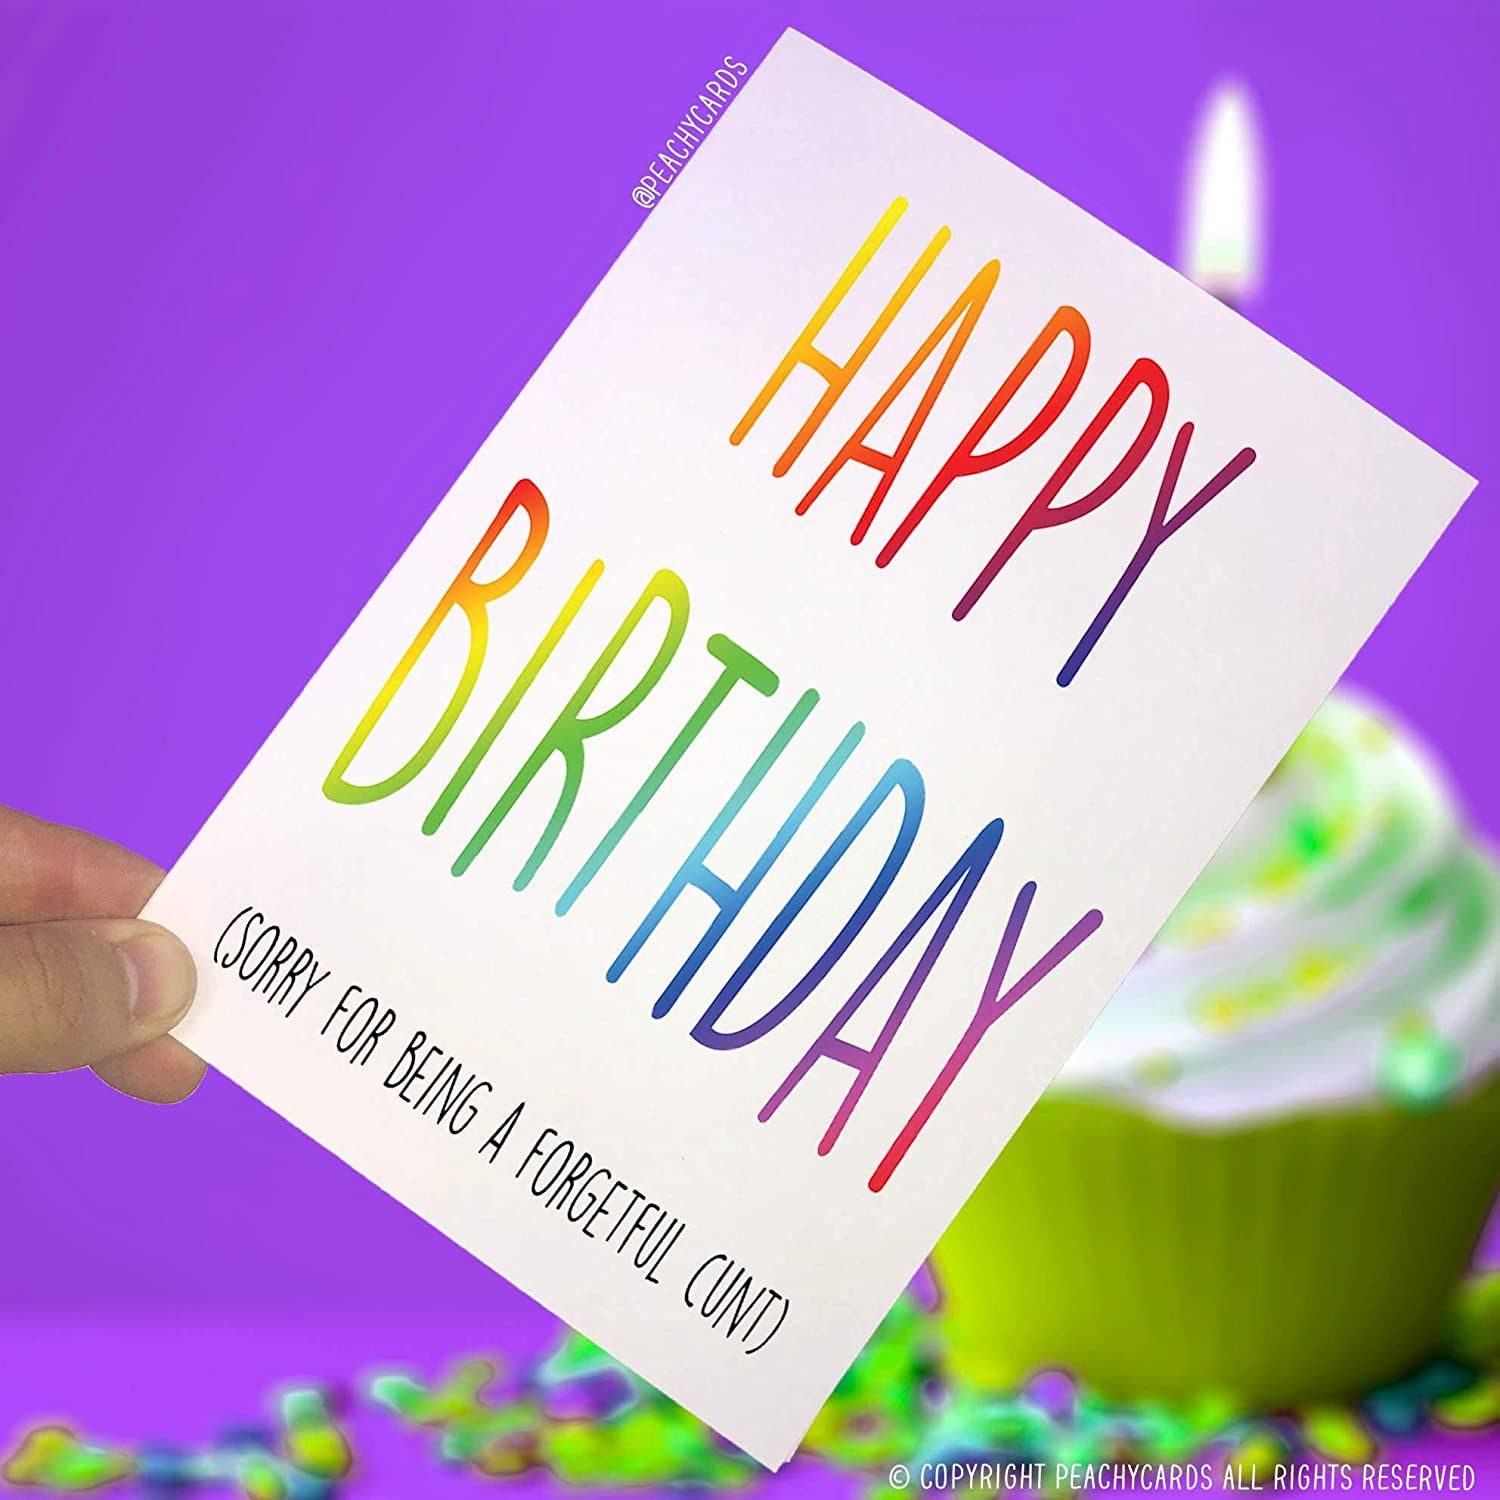 Peachy Antics ''Happy Birthday (Sorry For Being A Forgetful Cunt)'' Card RRP 2.21 CLEARANCE XL 99p